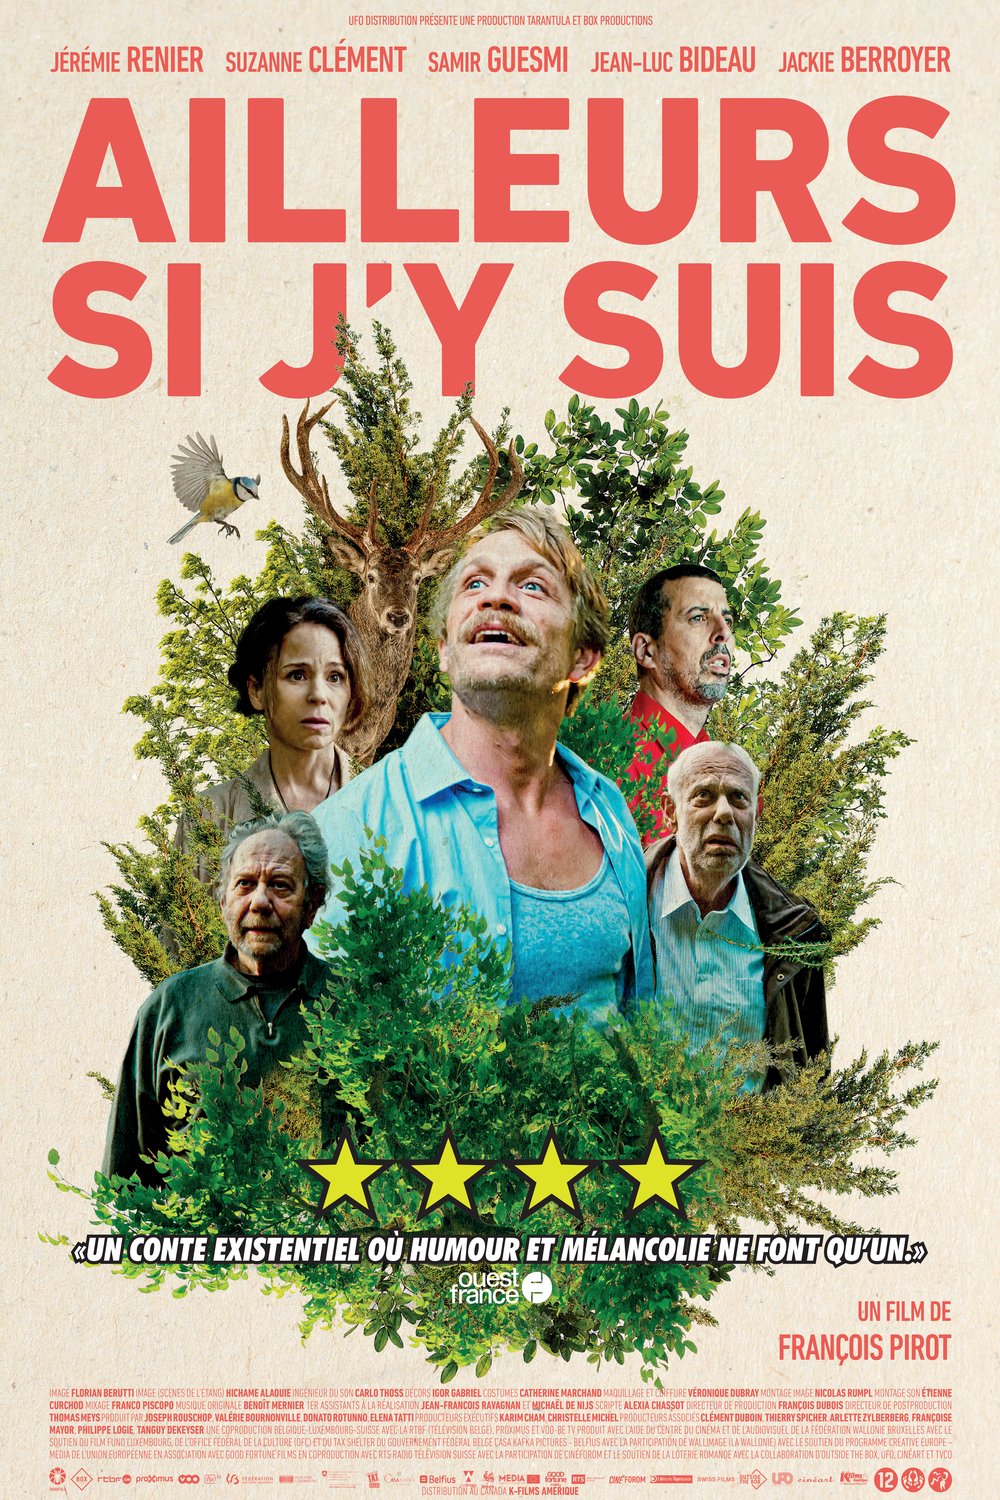 Poster of the movie Let's Get Lost